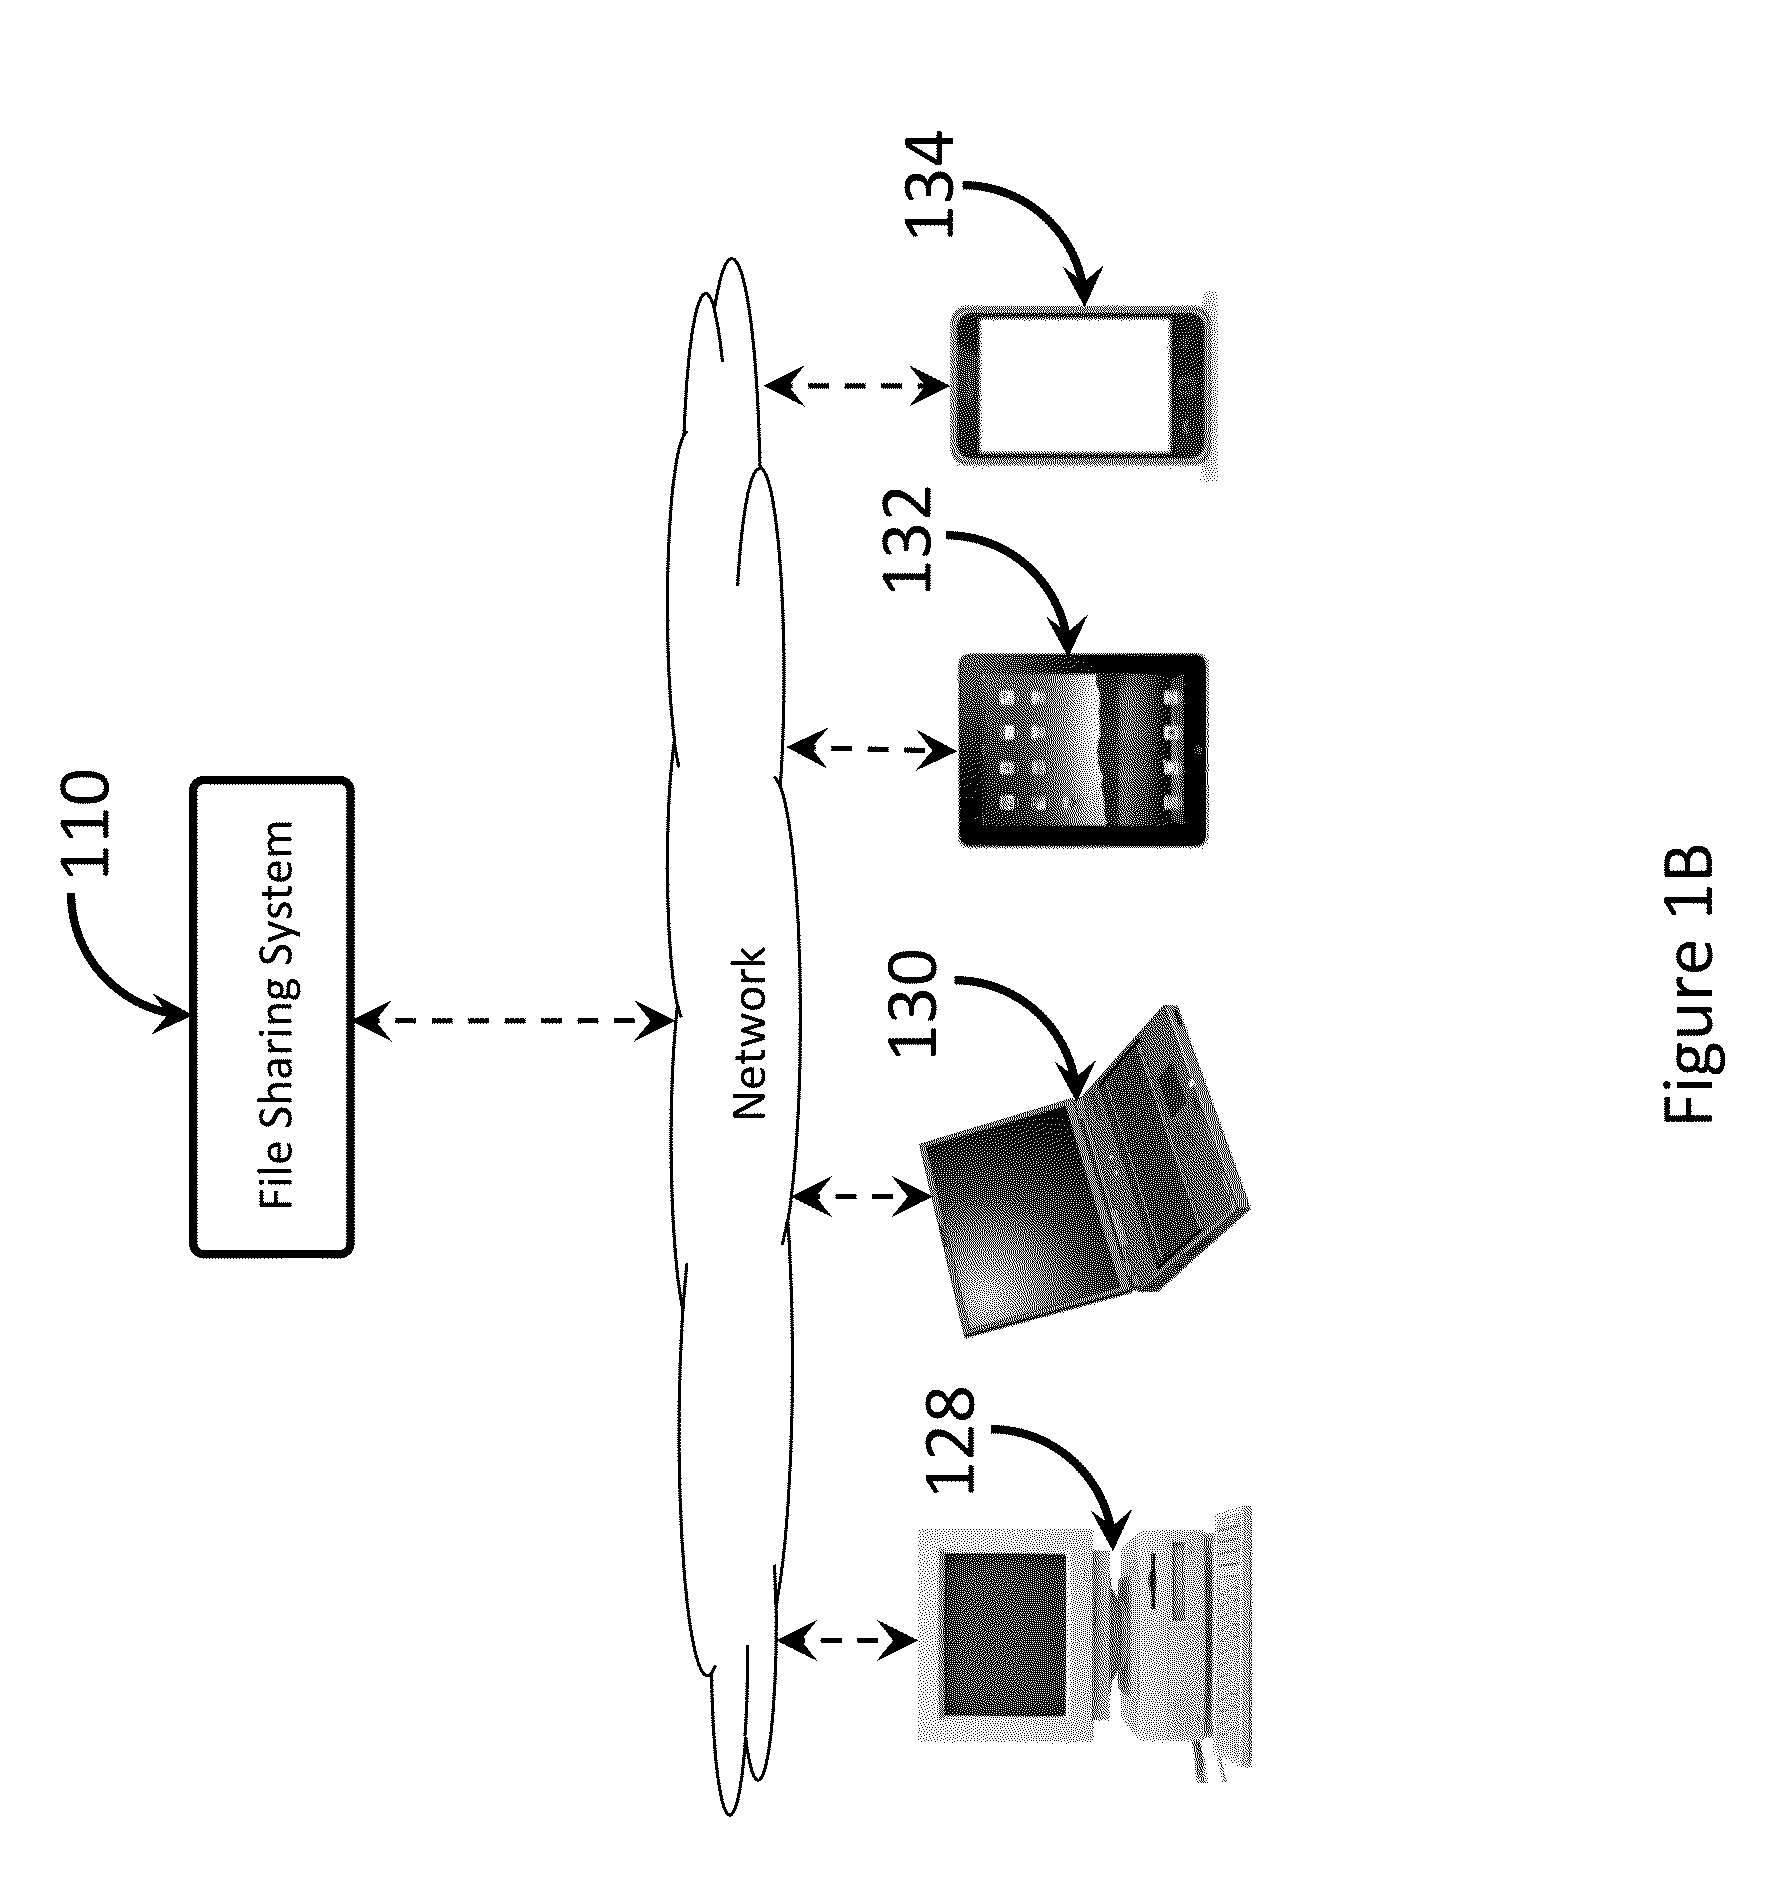 File sharing system and method